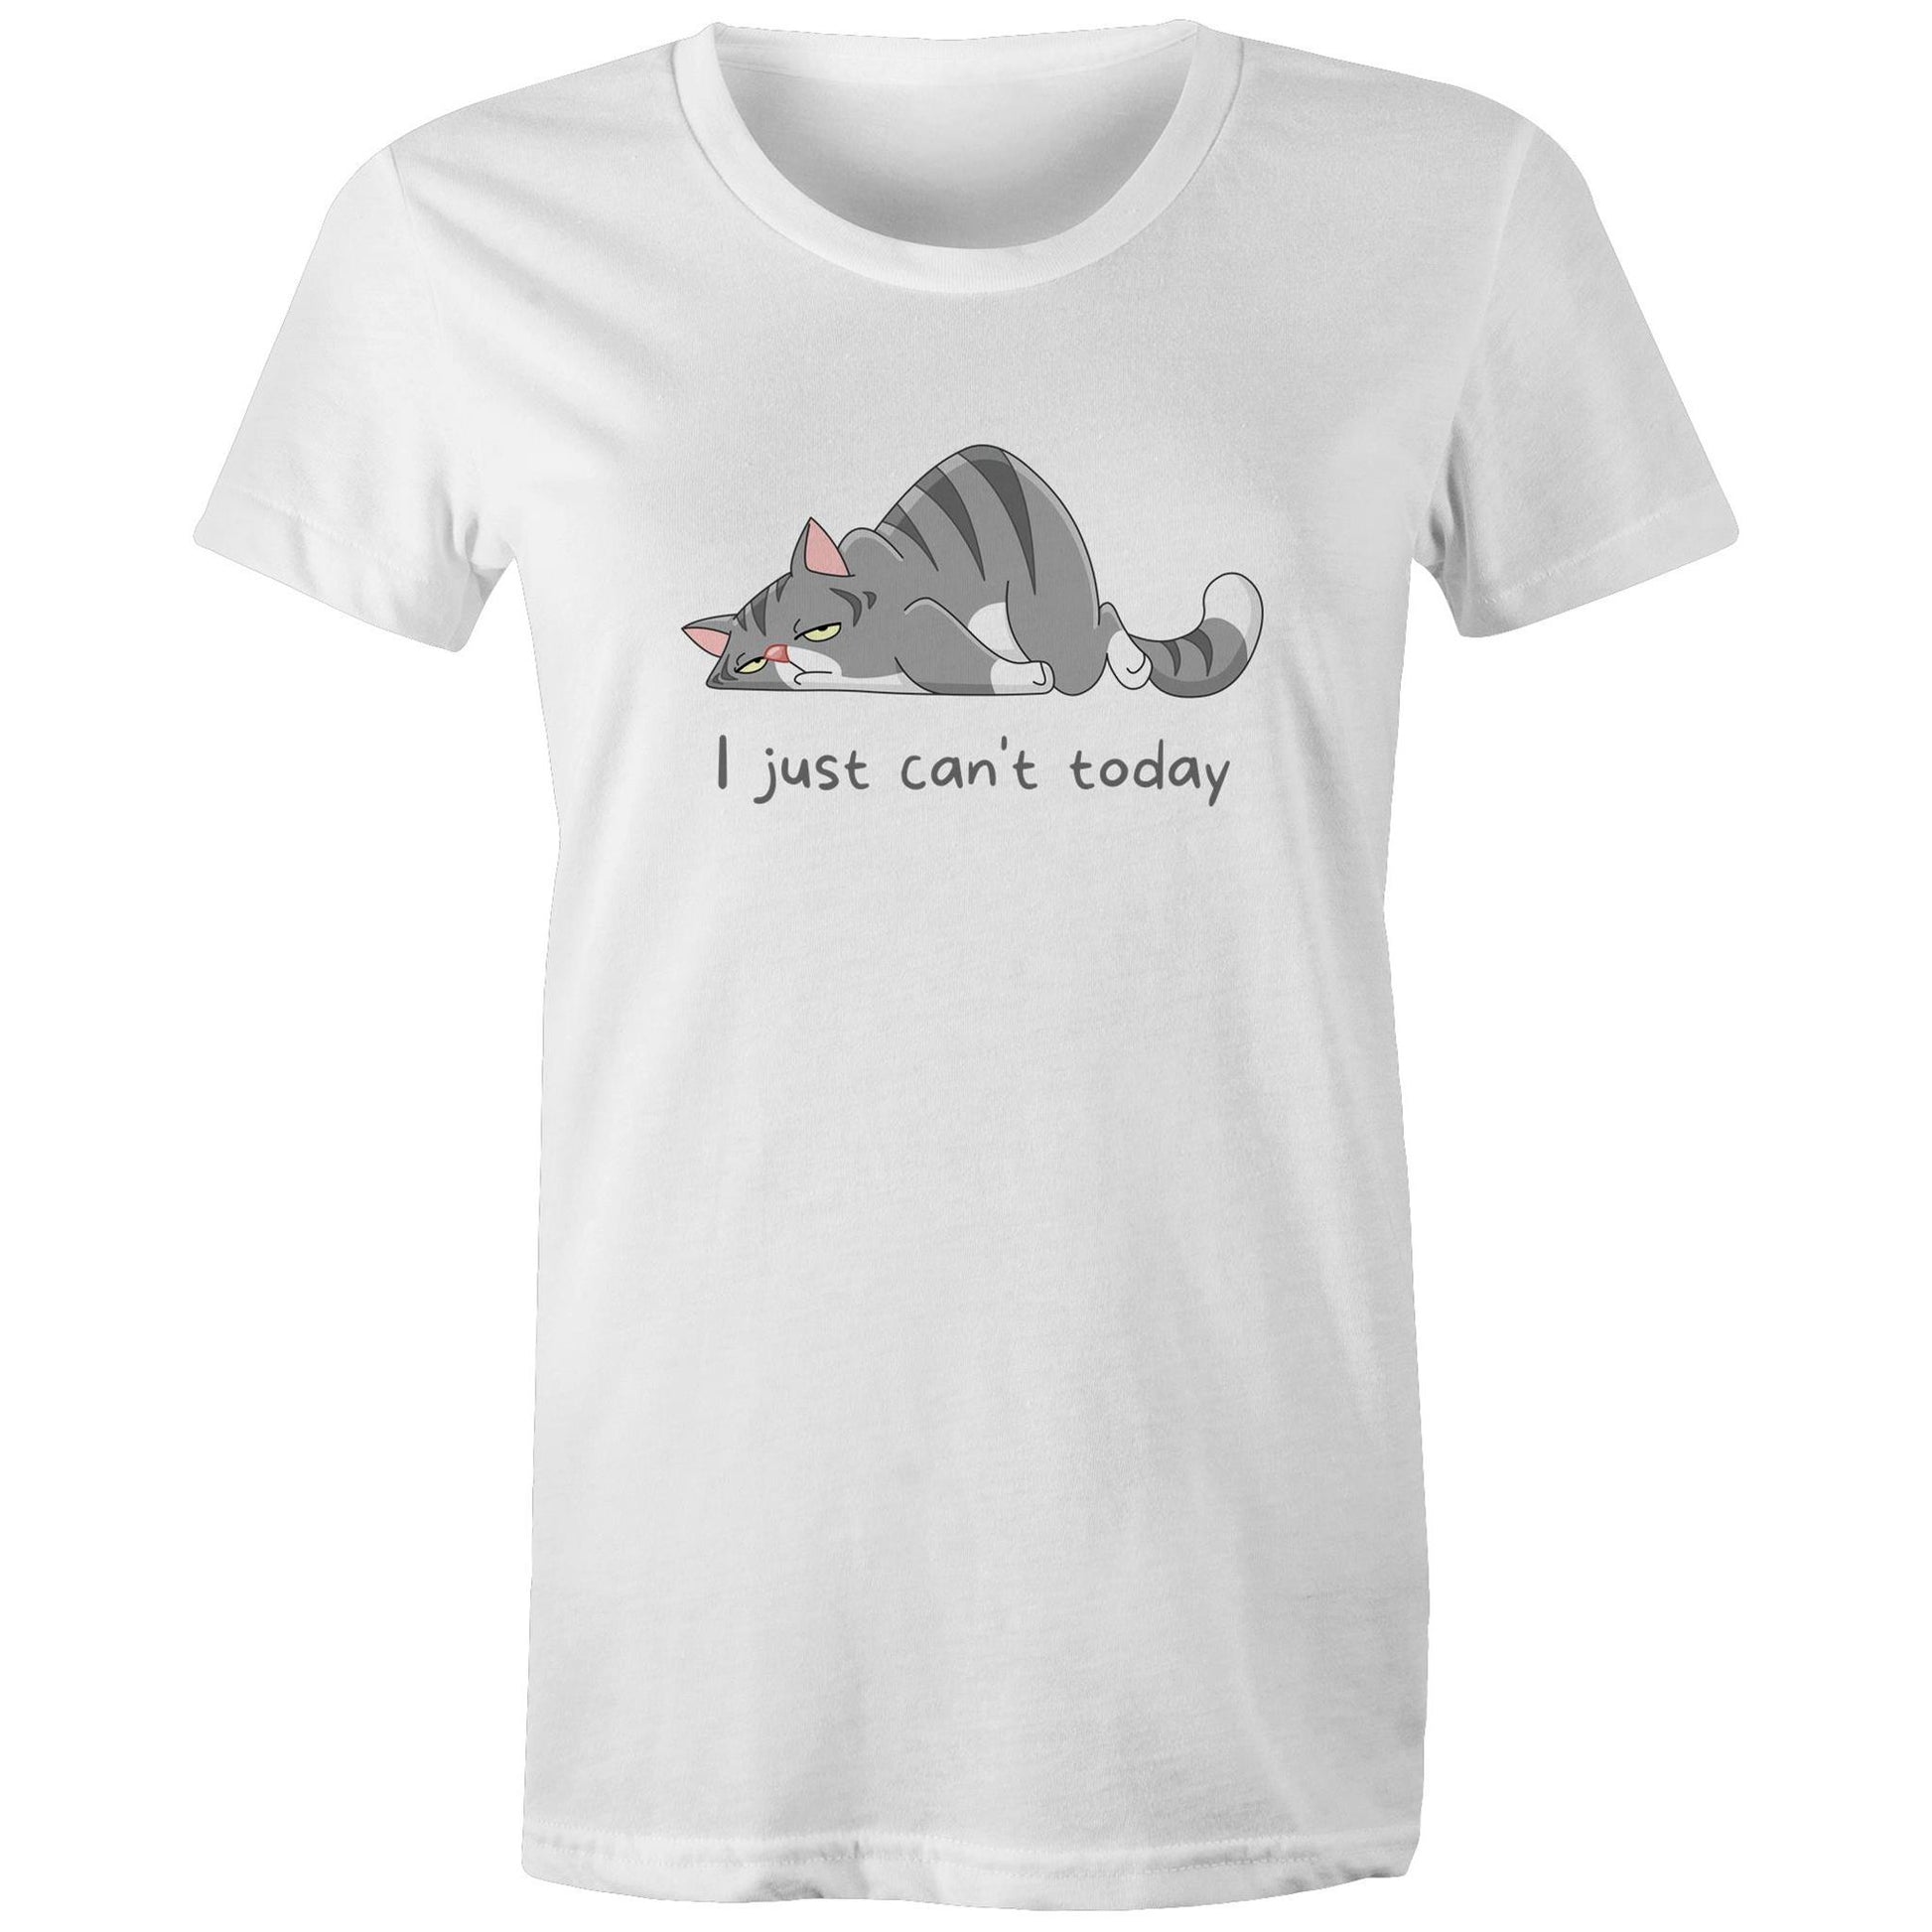 Cat, I Just Can't Today - Womens T-shirt White Womens T-shirt animal